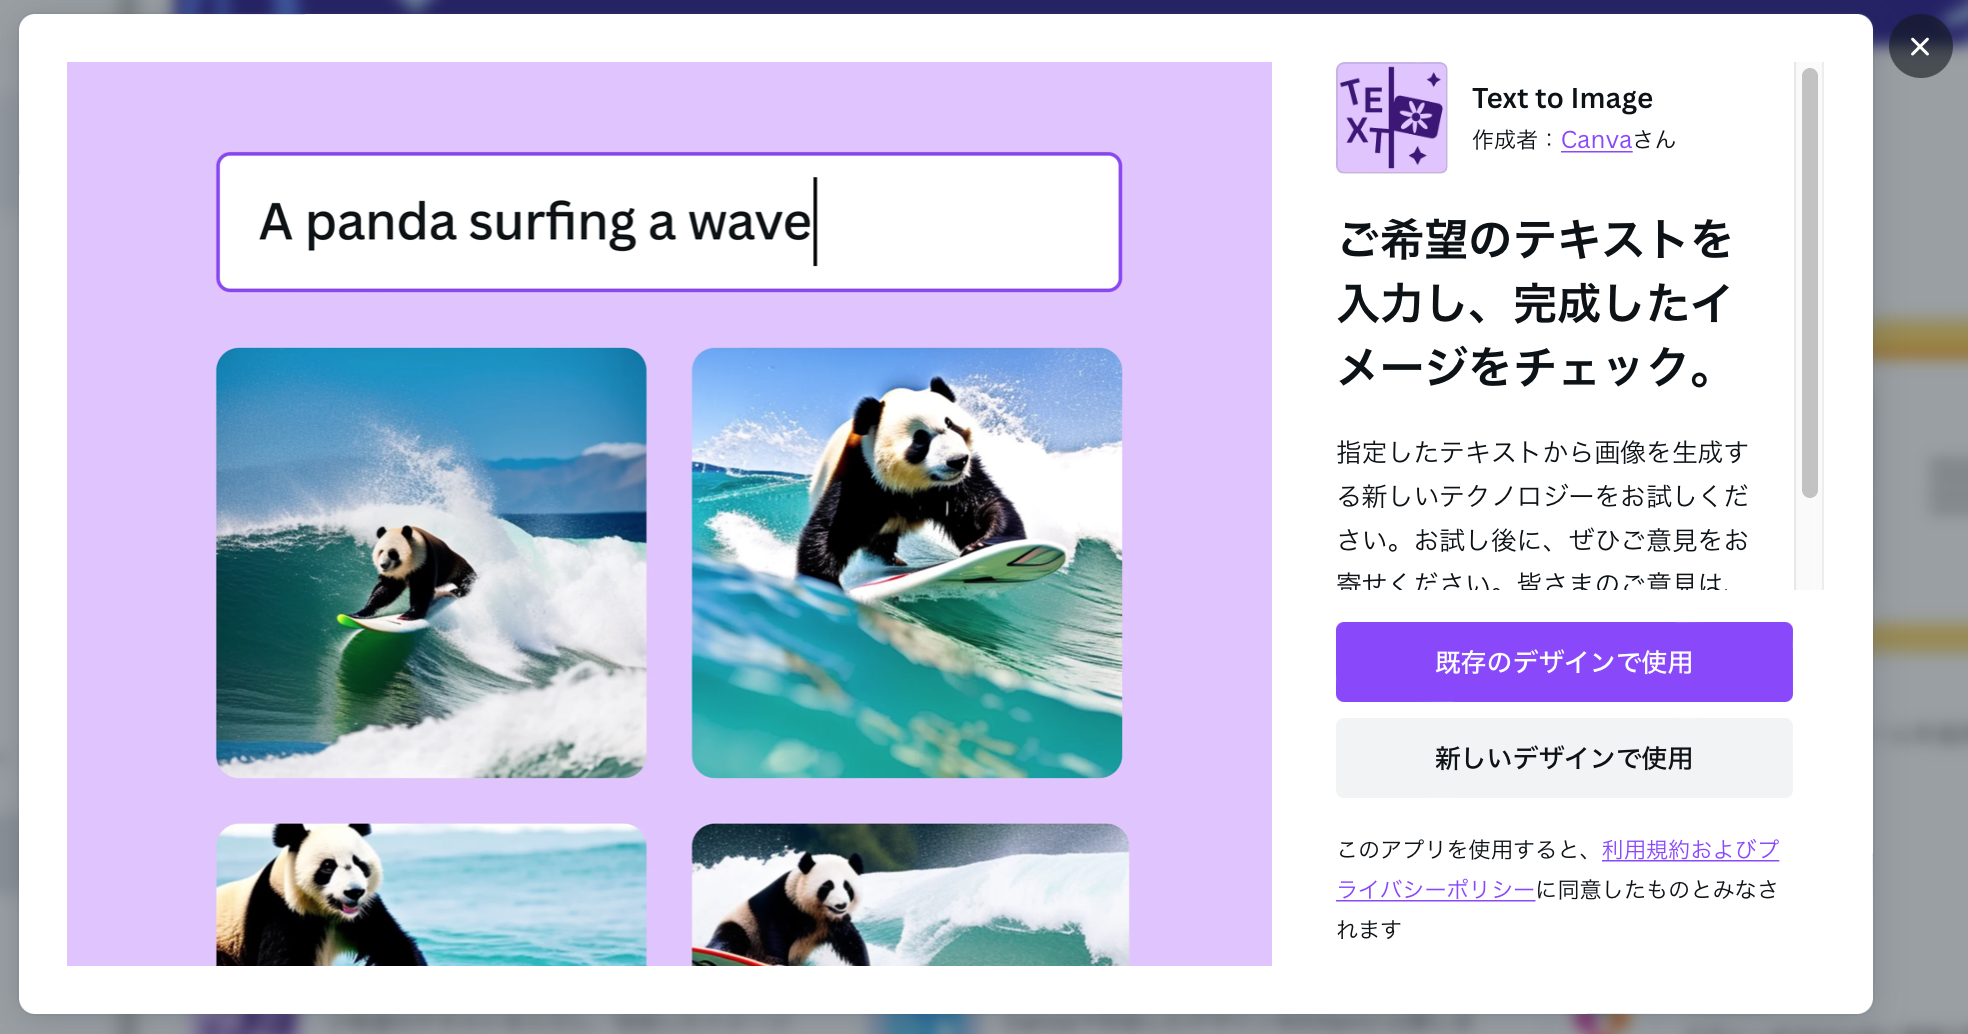 A panda surfing a wave